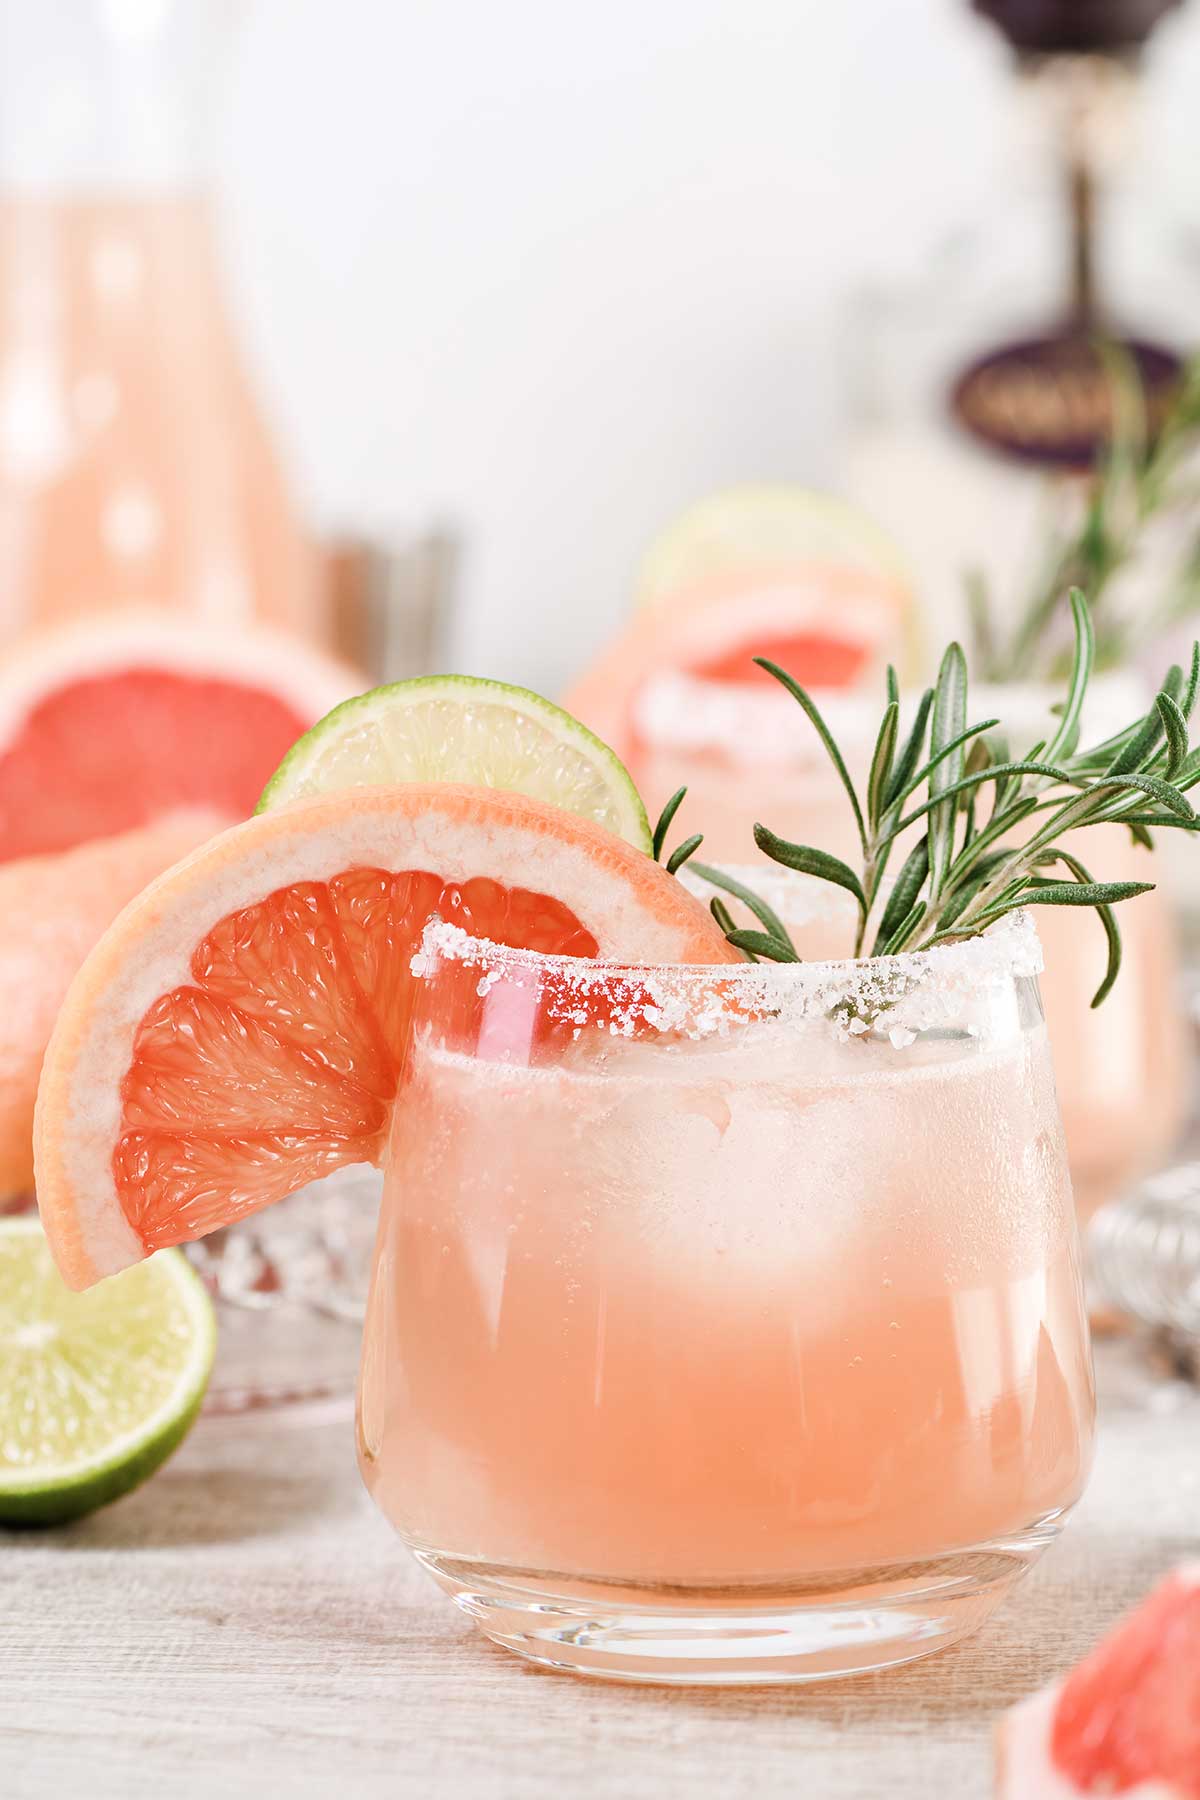 Paloma cocktail in a glass with a salt rim, garnished with a sprig of rosemary, a wedge of grapefruit, and a wedge of lime.